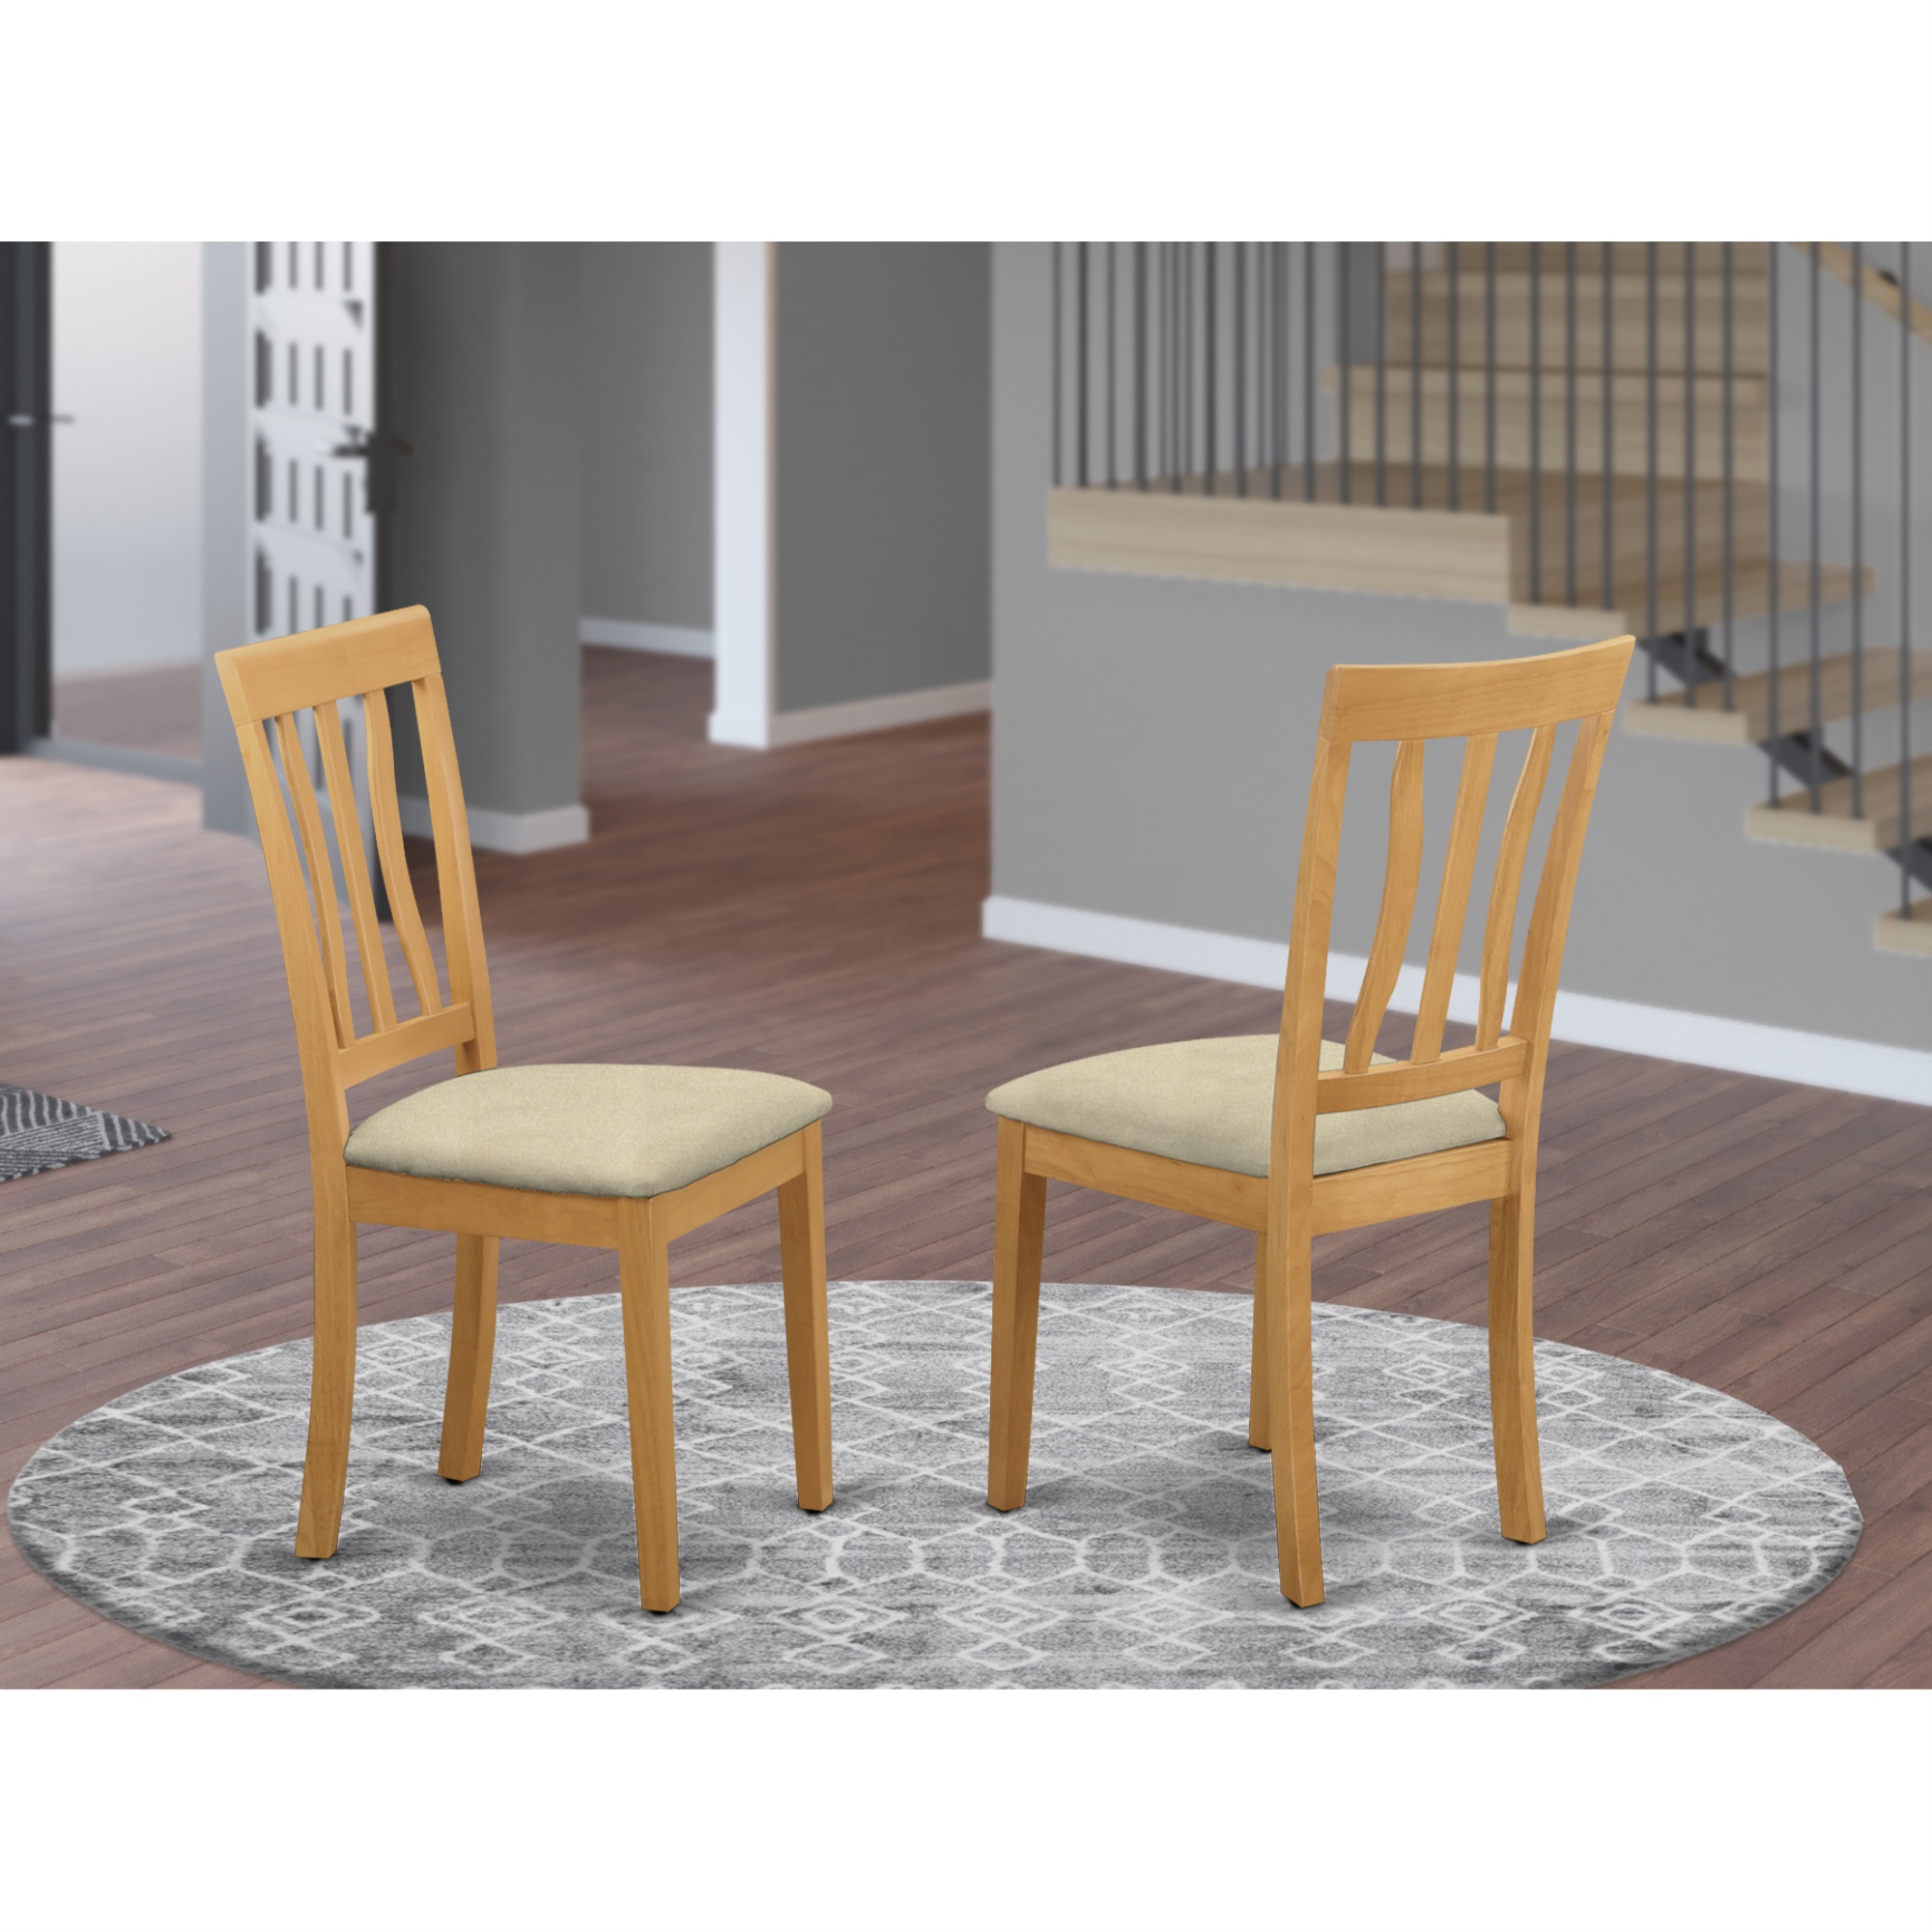 East West Furniture Set of 2 Chairs ANC-OAK-C Antique Dining Chair Cushion Seat with Oak Finish